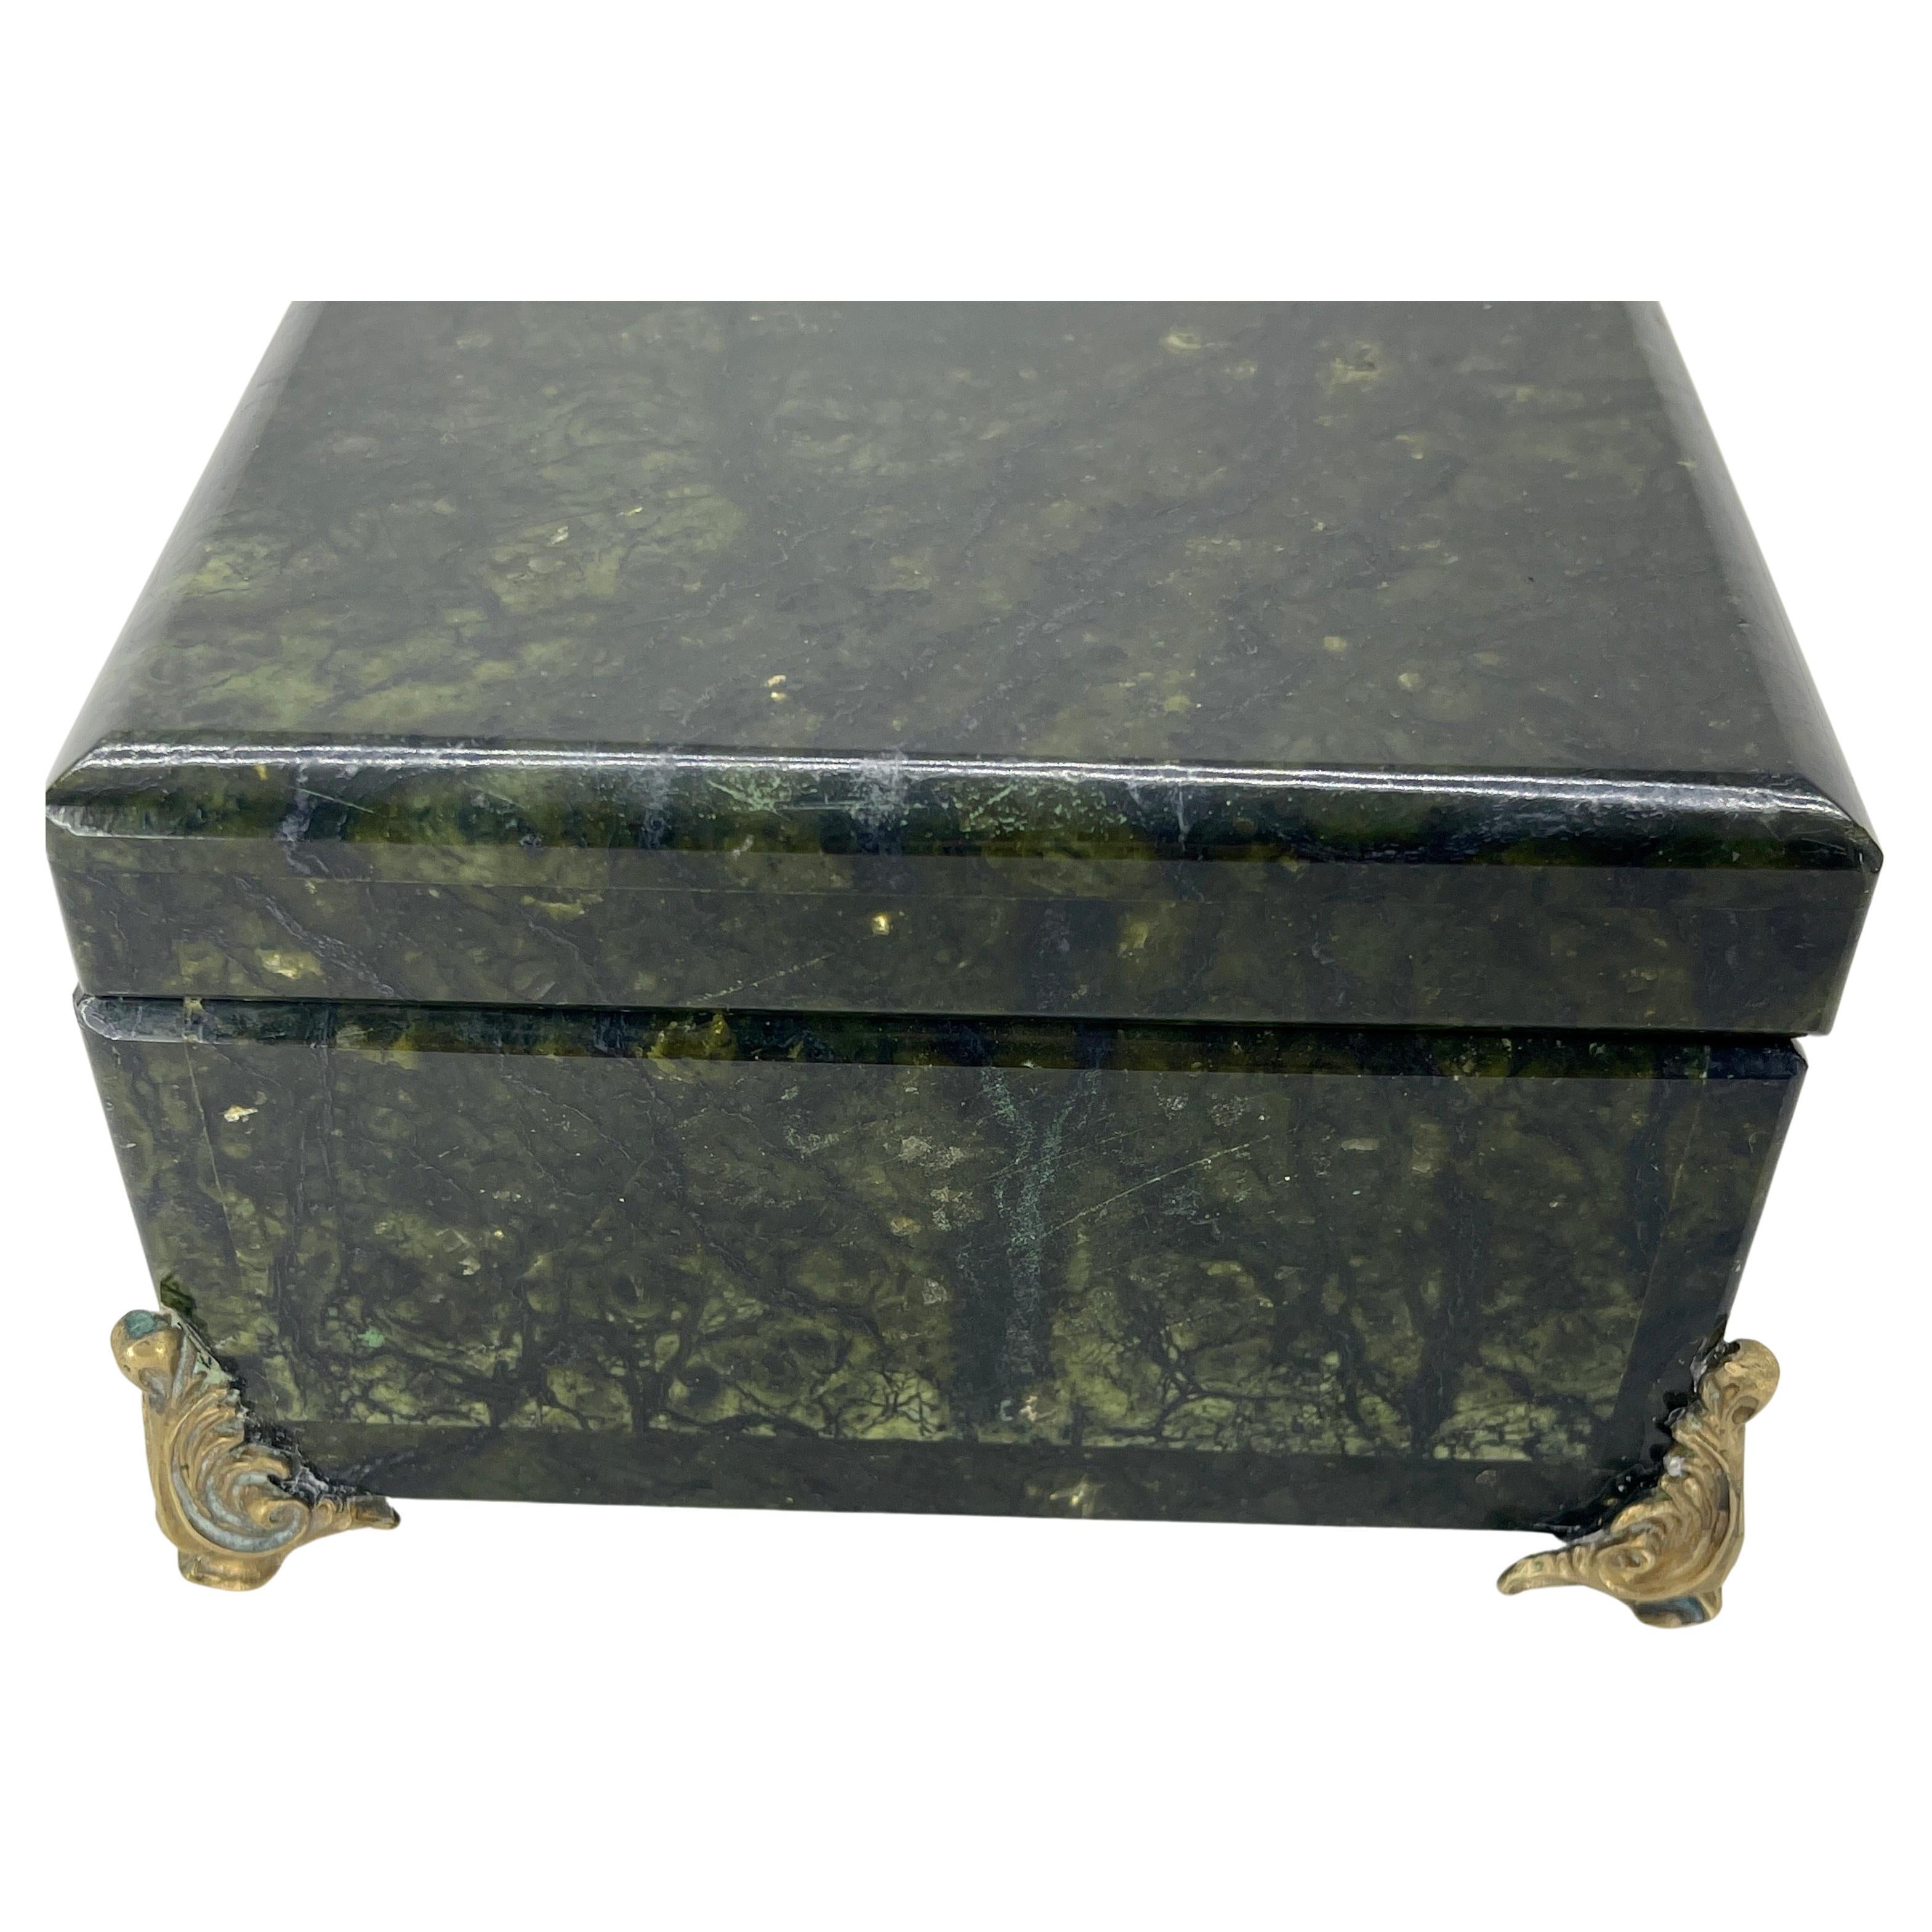 Rectangular Deep Forrest Green Marble and Bronze Jewelry Box, Italian circa 1930 For Sale 1